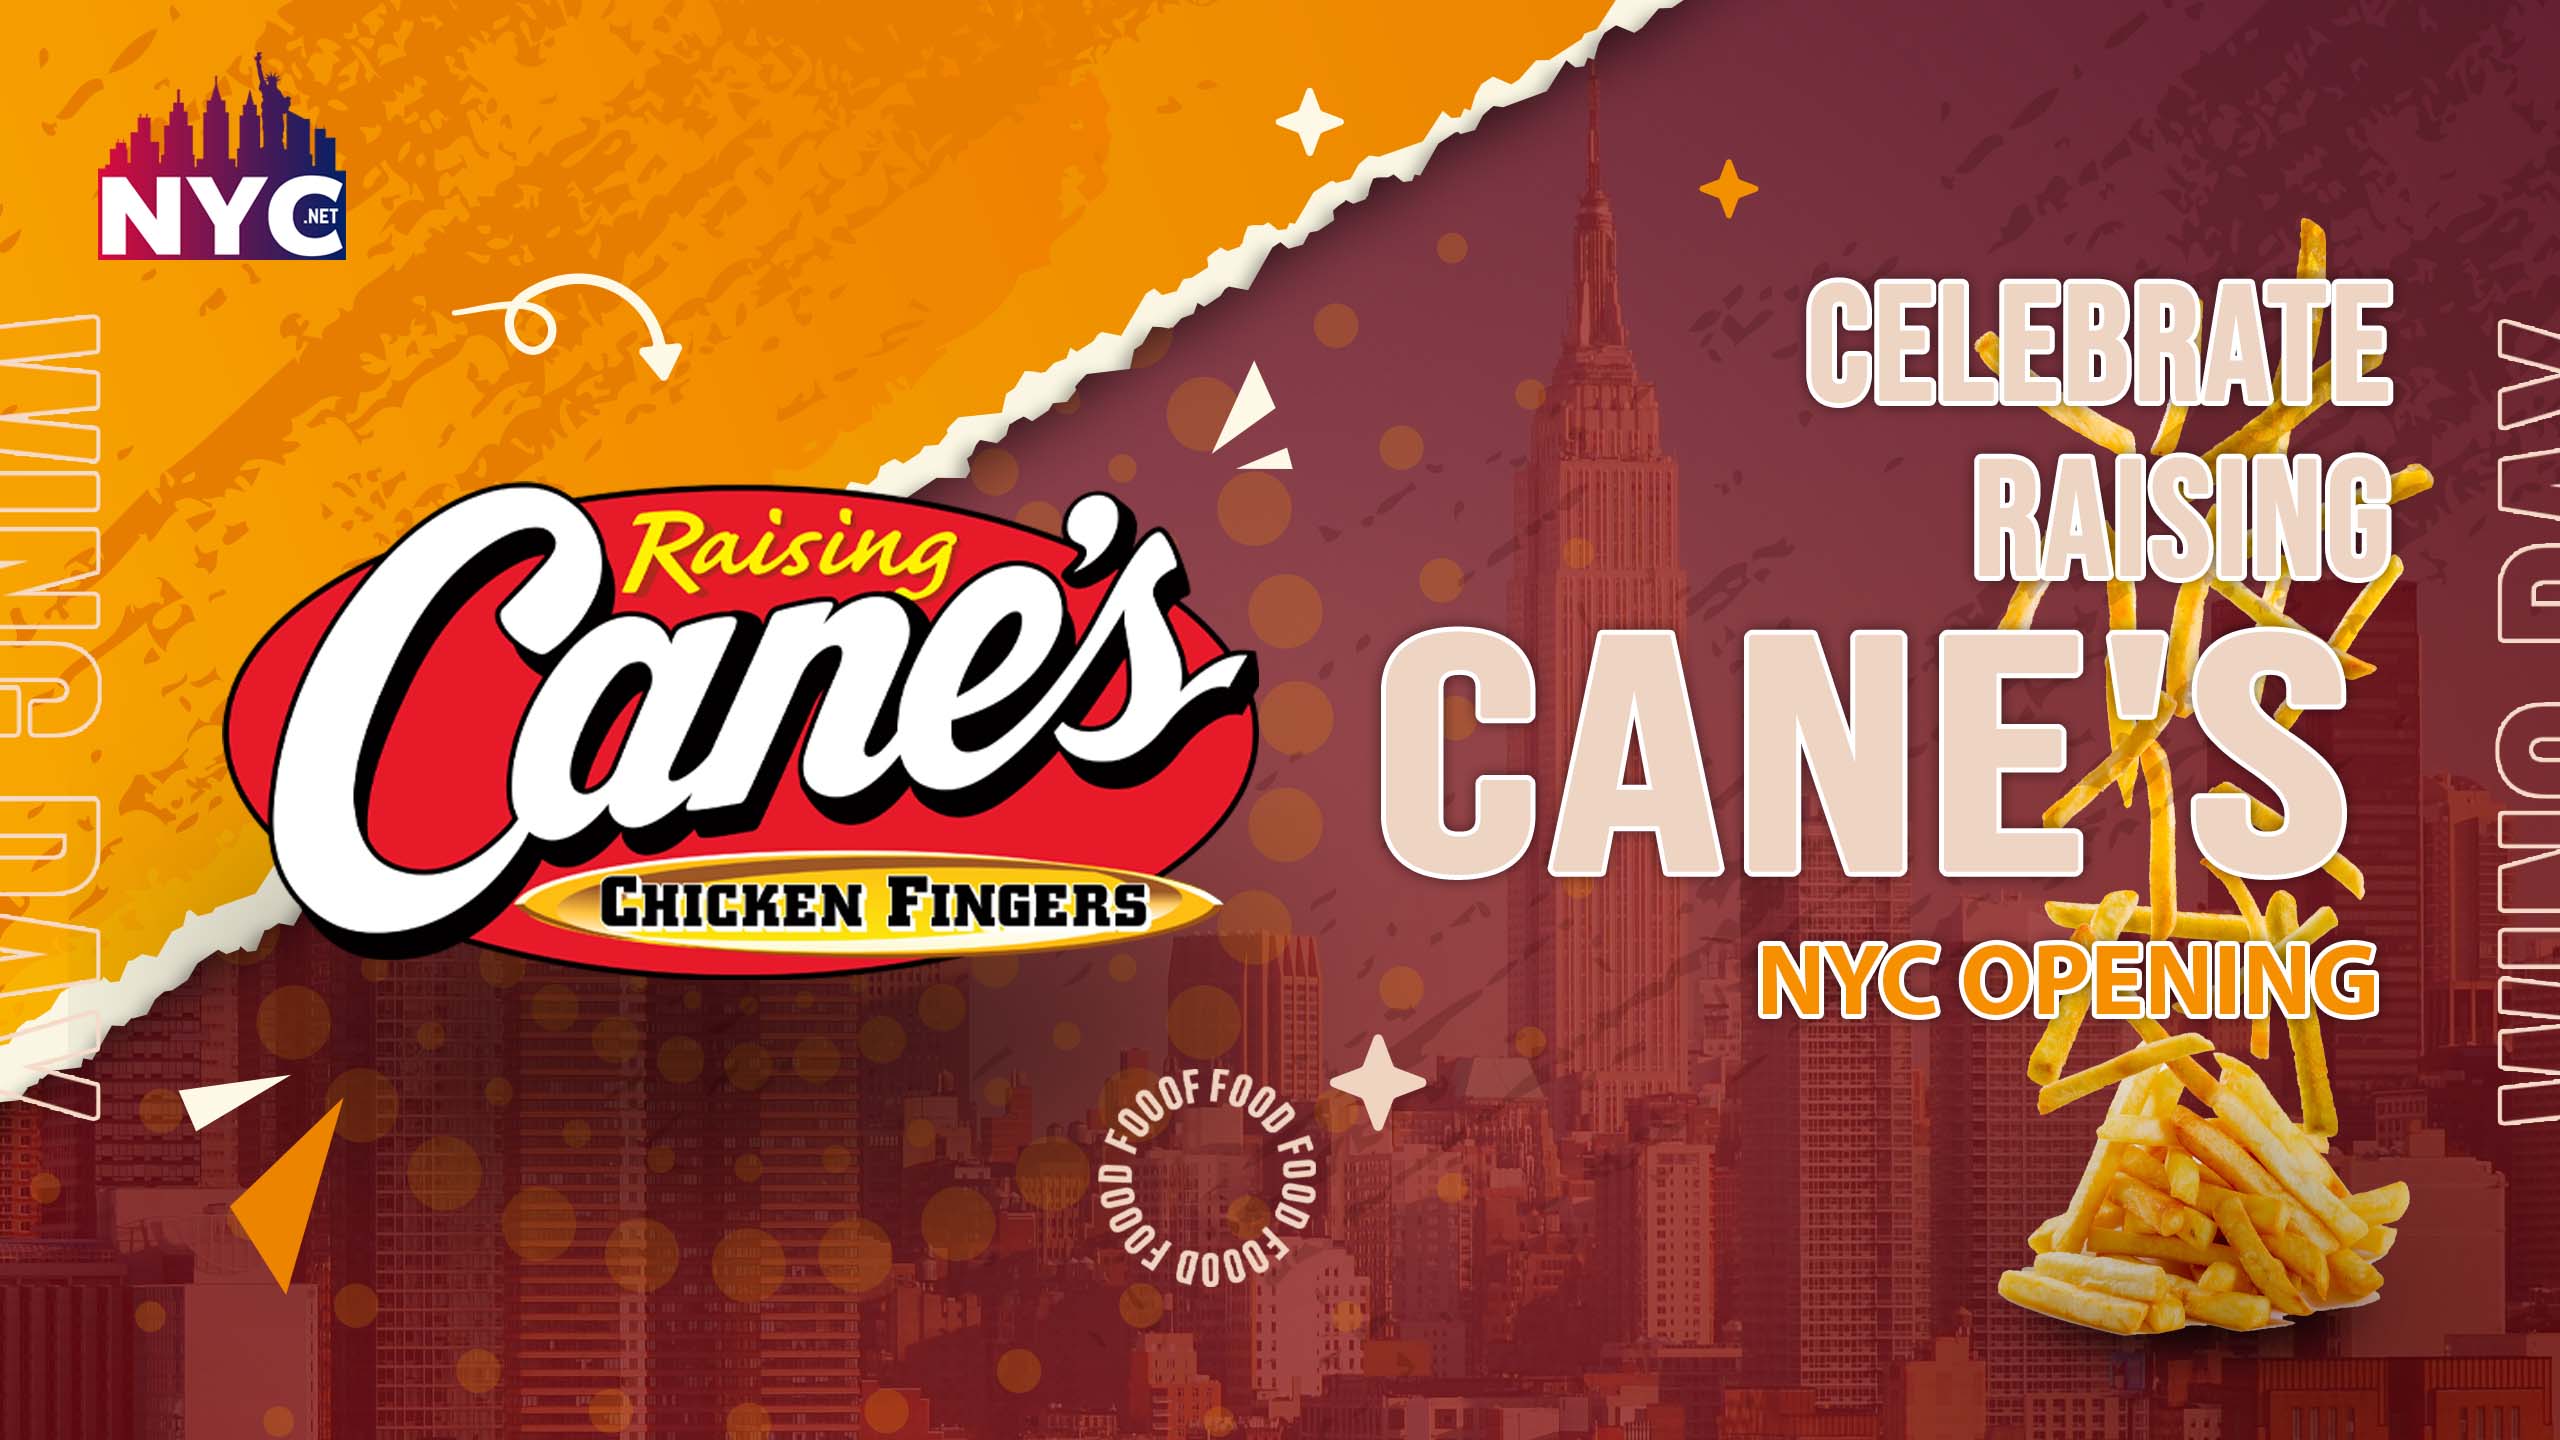 Celebrate Raising Cane's NYC opening. Best News For New York City